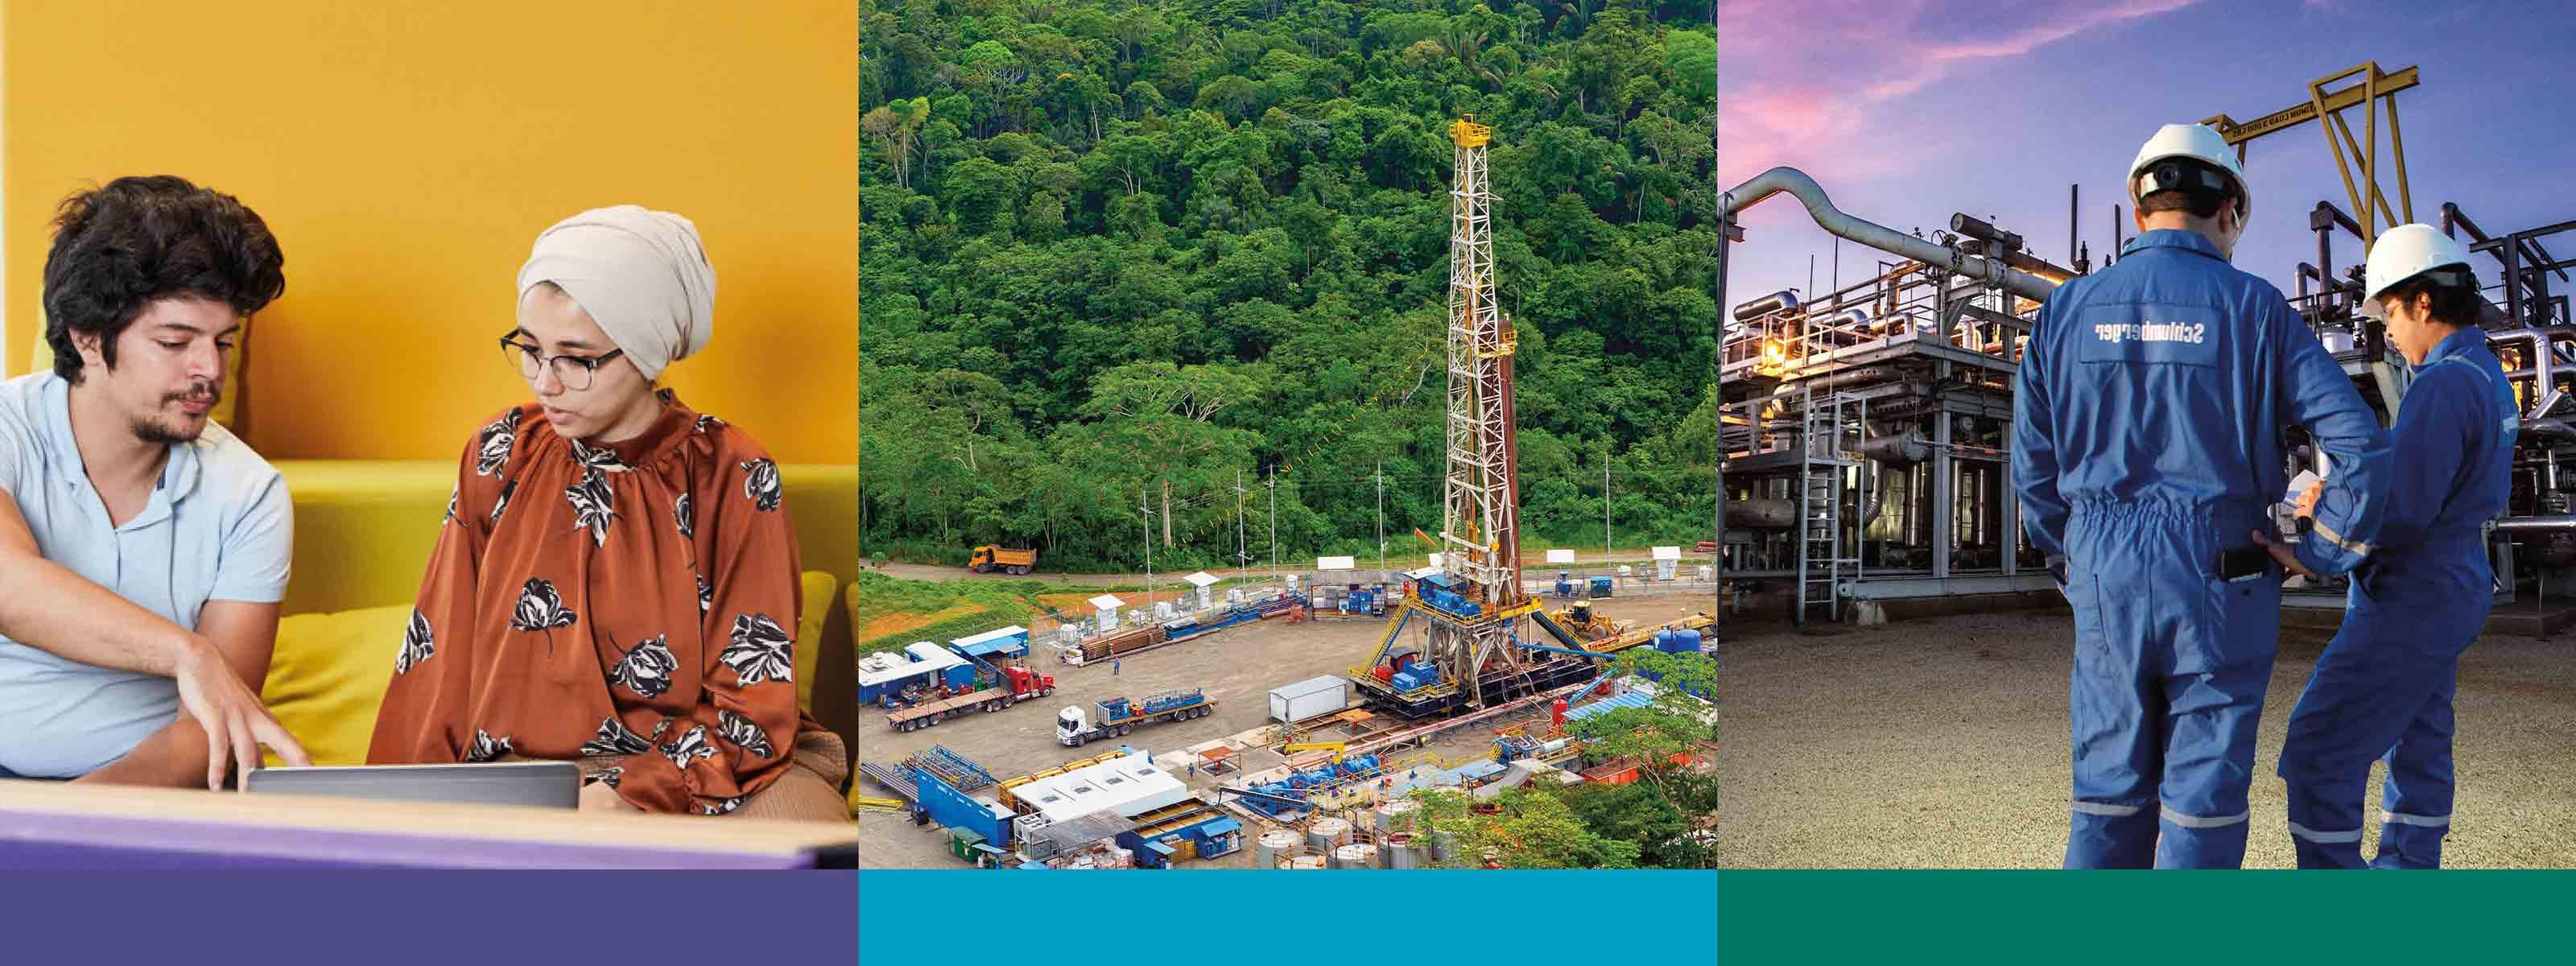 Schlumberger 2021 Sustainability Report cover shows upstream plant, a land rig, and employees.